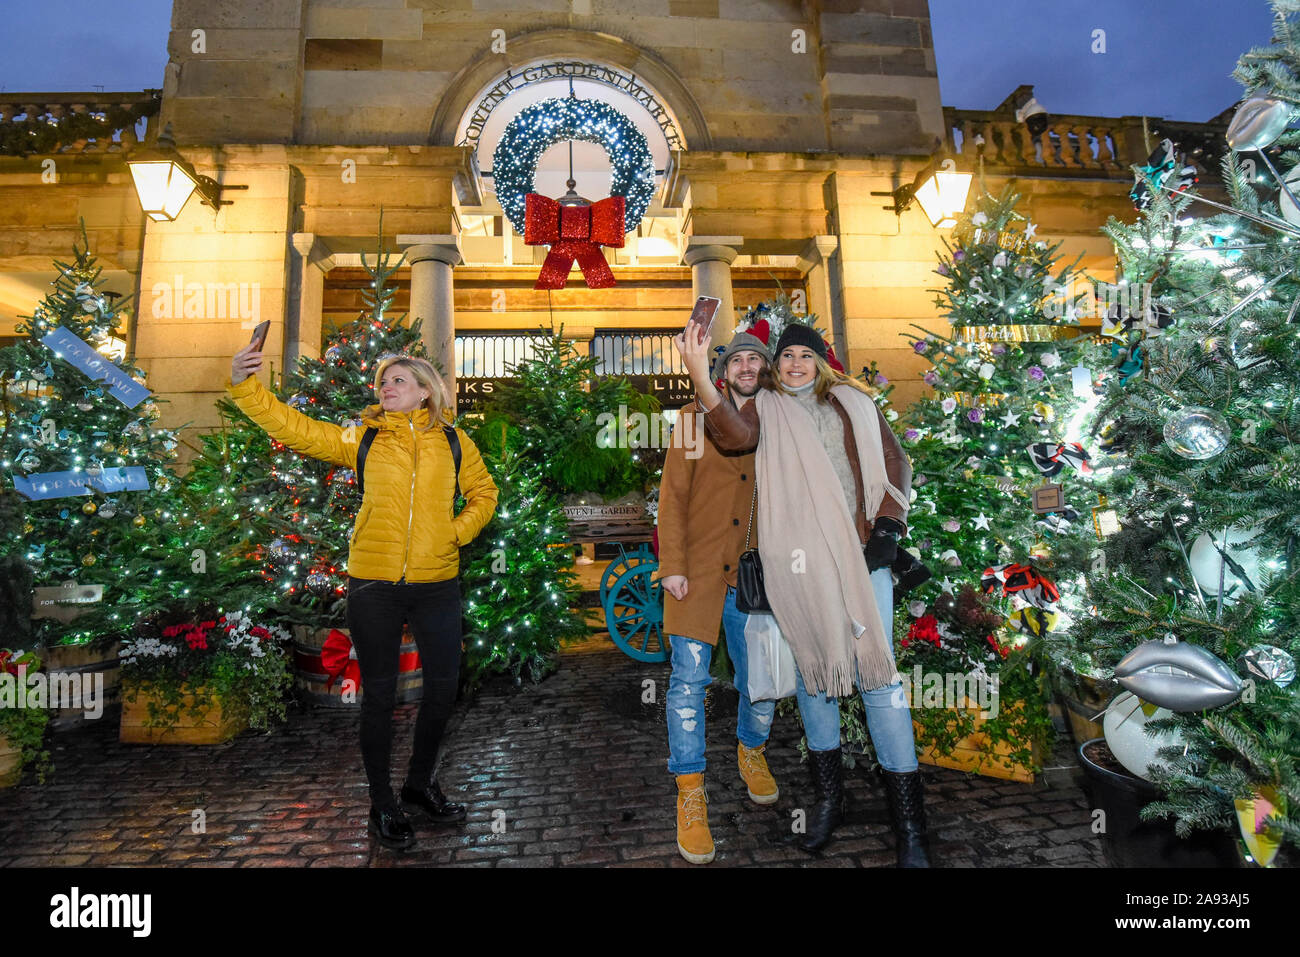 London, UK.  12 November 2019.  Tourists outside the Market Building ahead of the annual Christmas lights switch-on in Covent Garden.  Decorations include 40 large mistletoe chandeliers adorned with almost 700 glistening berries,  over 320 metres of garlands and around 100,000 pea lights suspended within the historic Market Building.  Outside, the world famous Piazza hosts London’s biggest hand-picked Christmas tree.  Credit: Stephen Chung / Alamy Live News Stock Photo